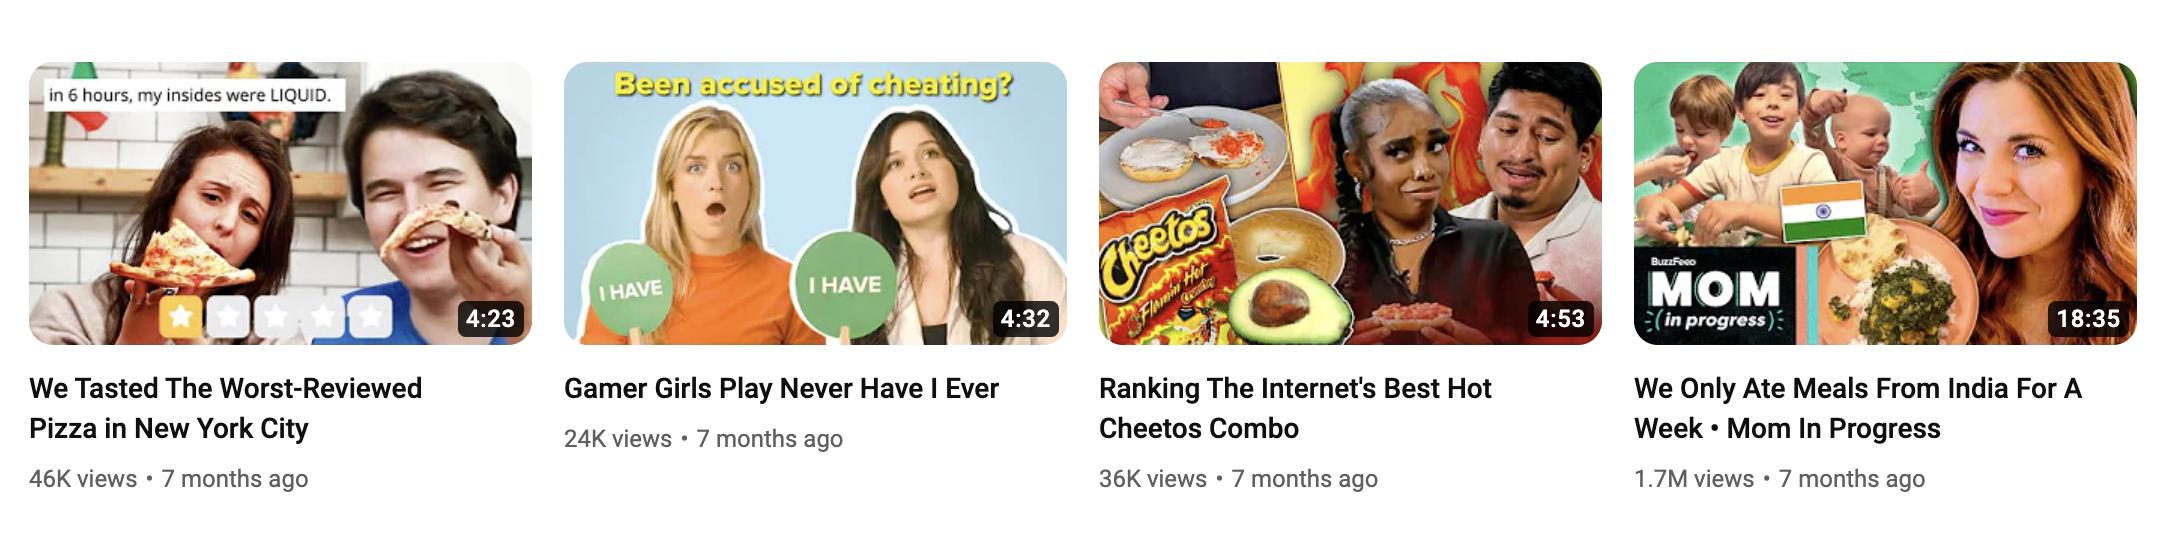 Buzzfeed YouTube thumbnails featuring catchy titles